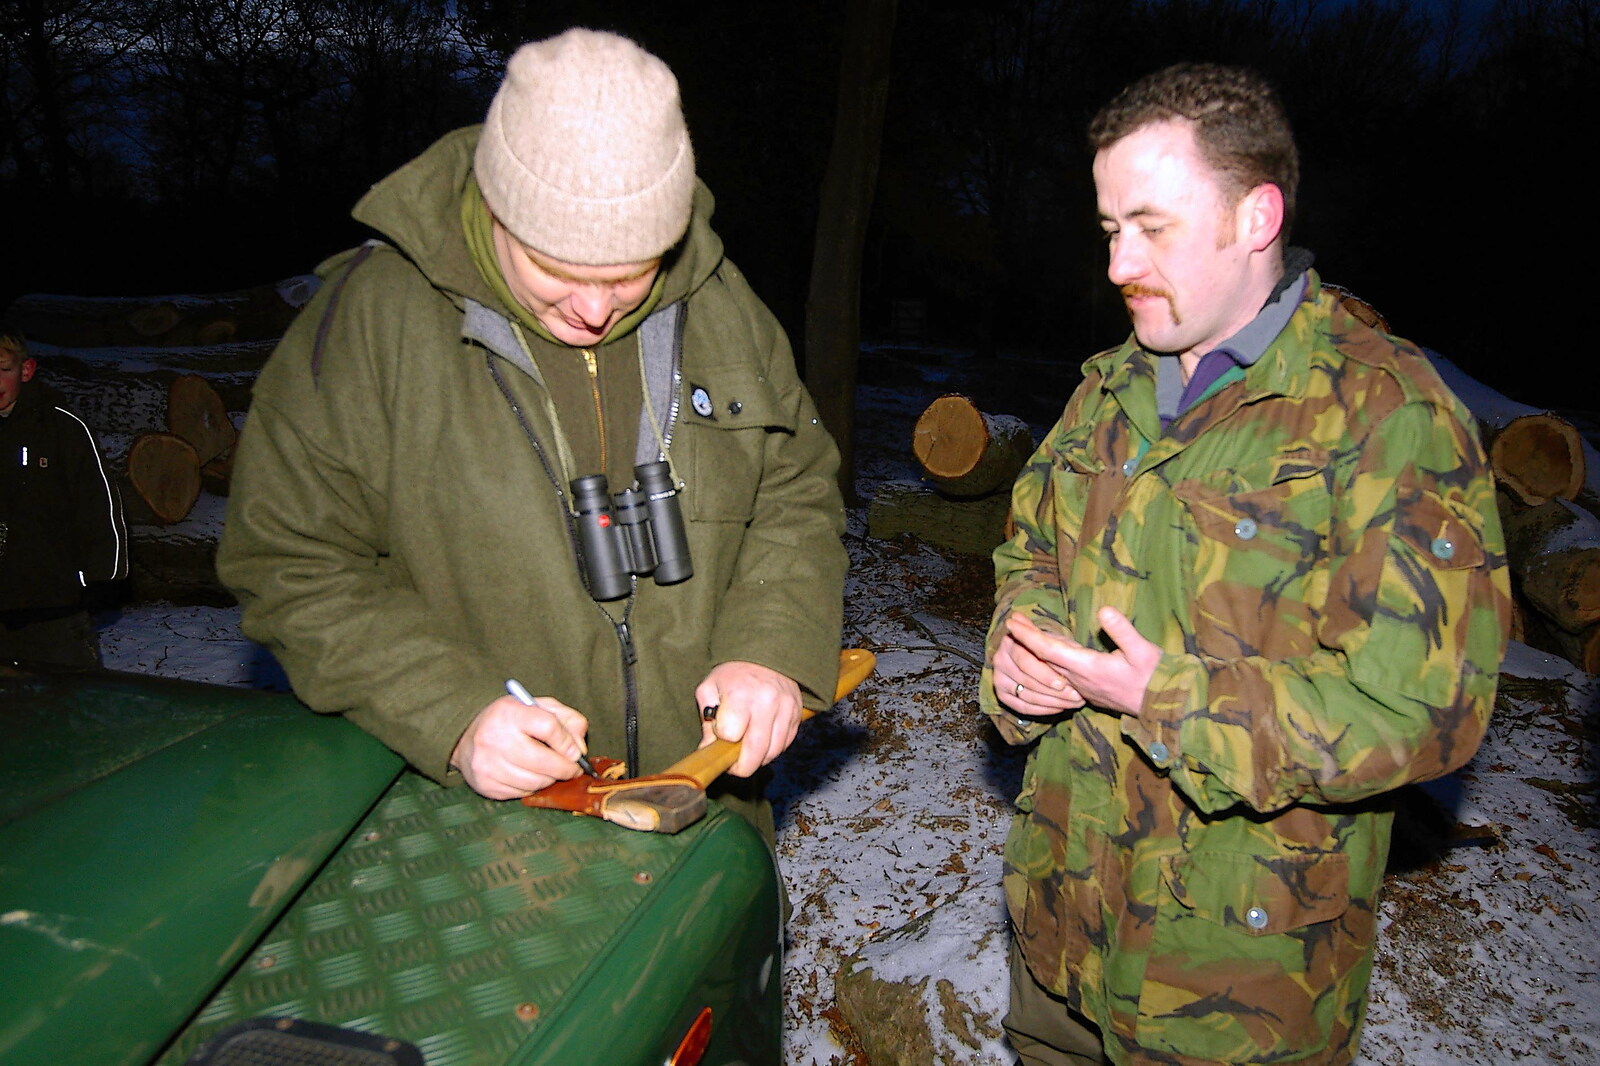 Ray signs an axe from Walk Like a Shadow: A Day With Ray Mears, Ashdown Forest, East Sussex - 29th December 2005